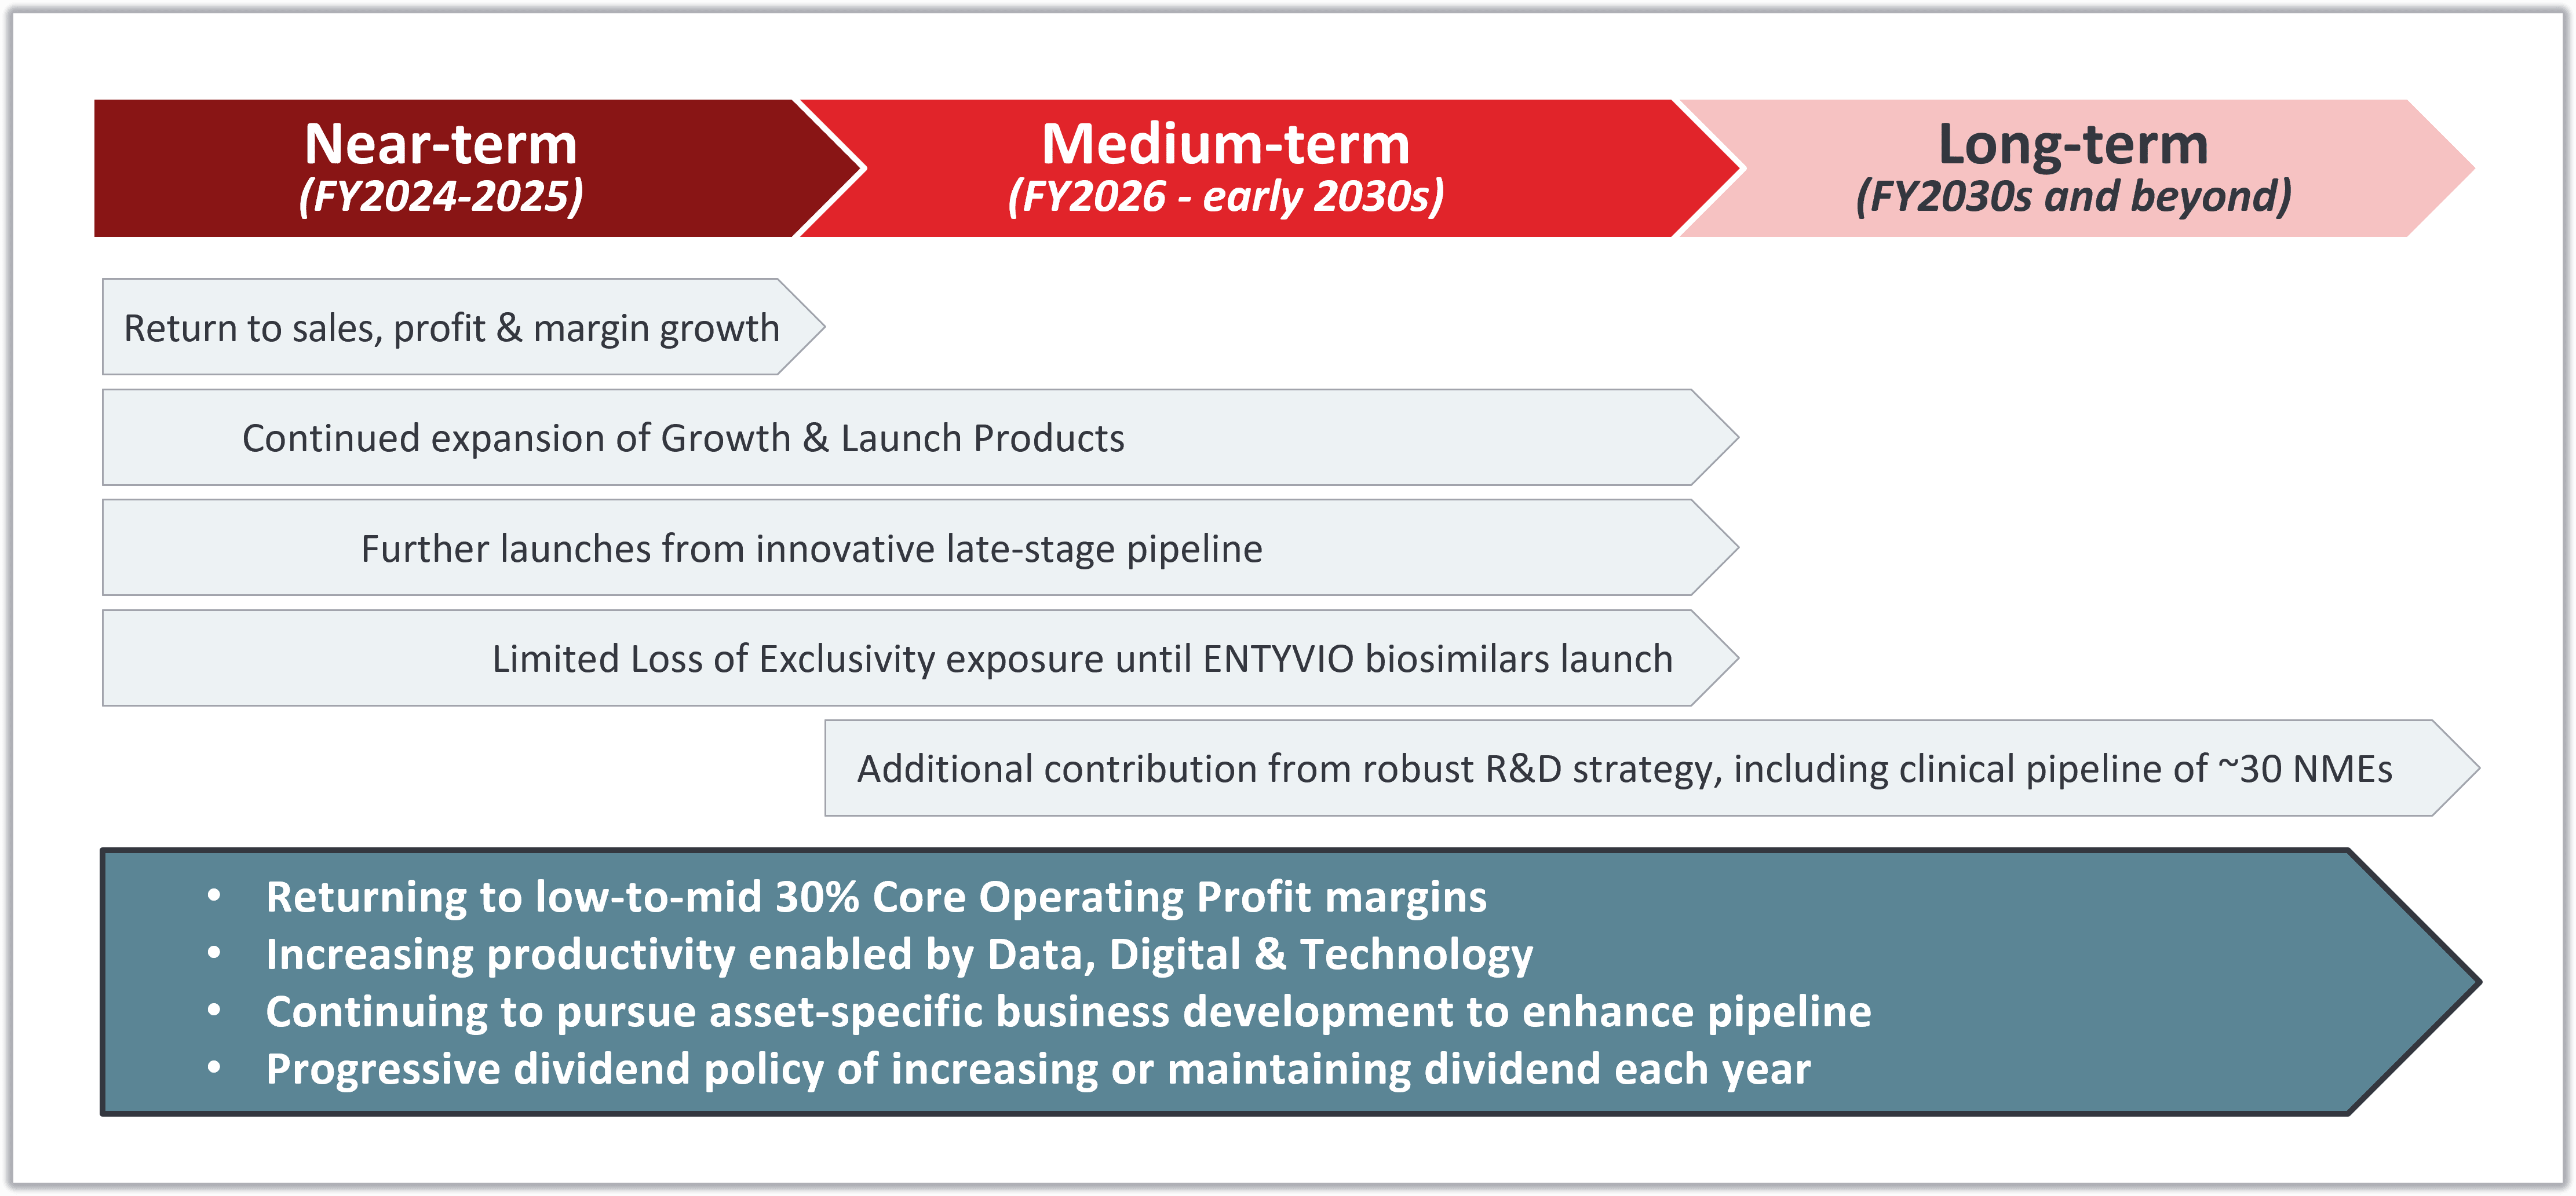 A timeline showing our near-, mid- and long-term growth outlook. We expect limited loss-of-exclusivity exposure until the launch of ENTYVIO biosimilars, which could be as late as 2032. We expect that the momentum from our Growth & Launch Products, coupled with new launches from our pipeline, will return us to growth in the near term and form the cornerstone of our future growth profile. As we look to the future, we remain committed to returning to a Core Operating Profit margin in the low-to-mid 30%, supported by productivity improvements driven by data, digital and technology. We also expect additional contribution from our robust R\&D strategy, including clinical pipeline of \~40 NMEs.